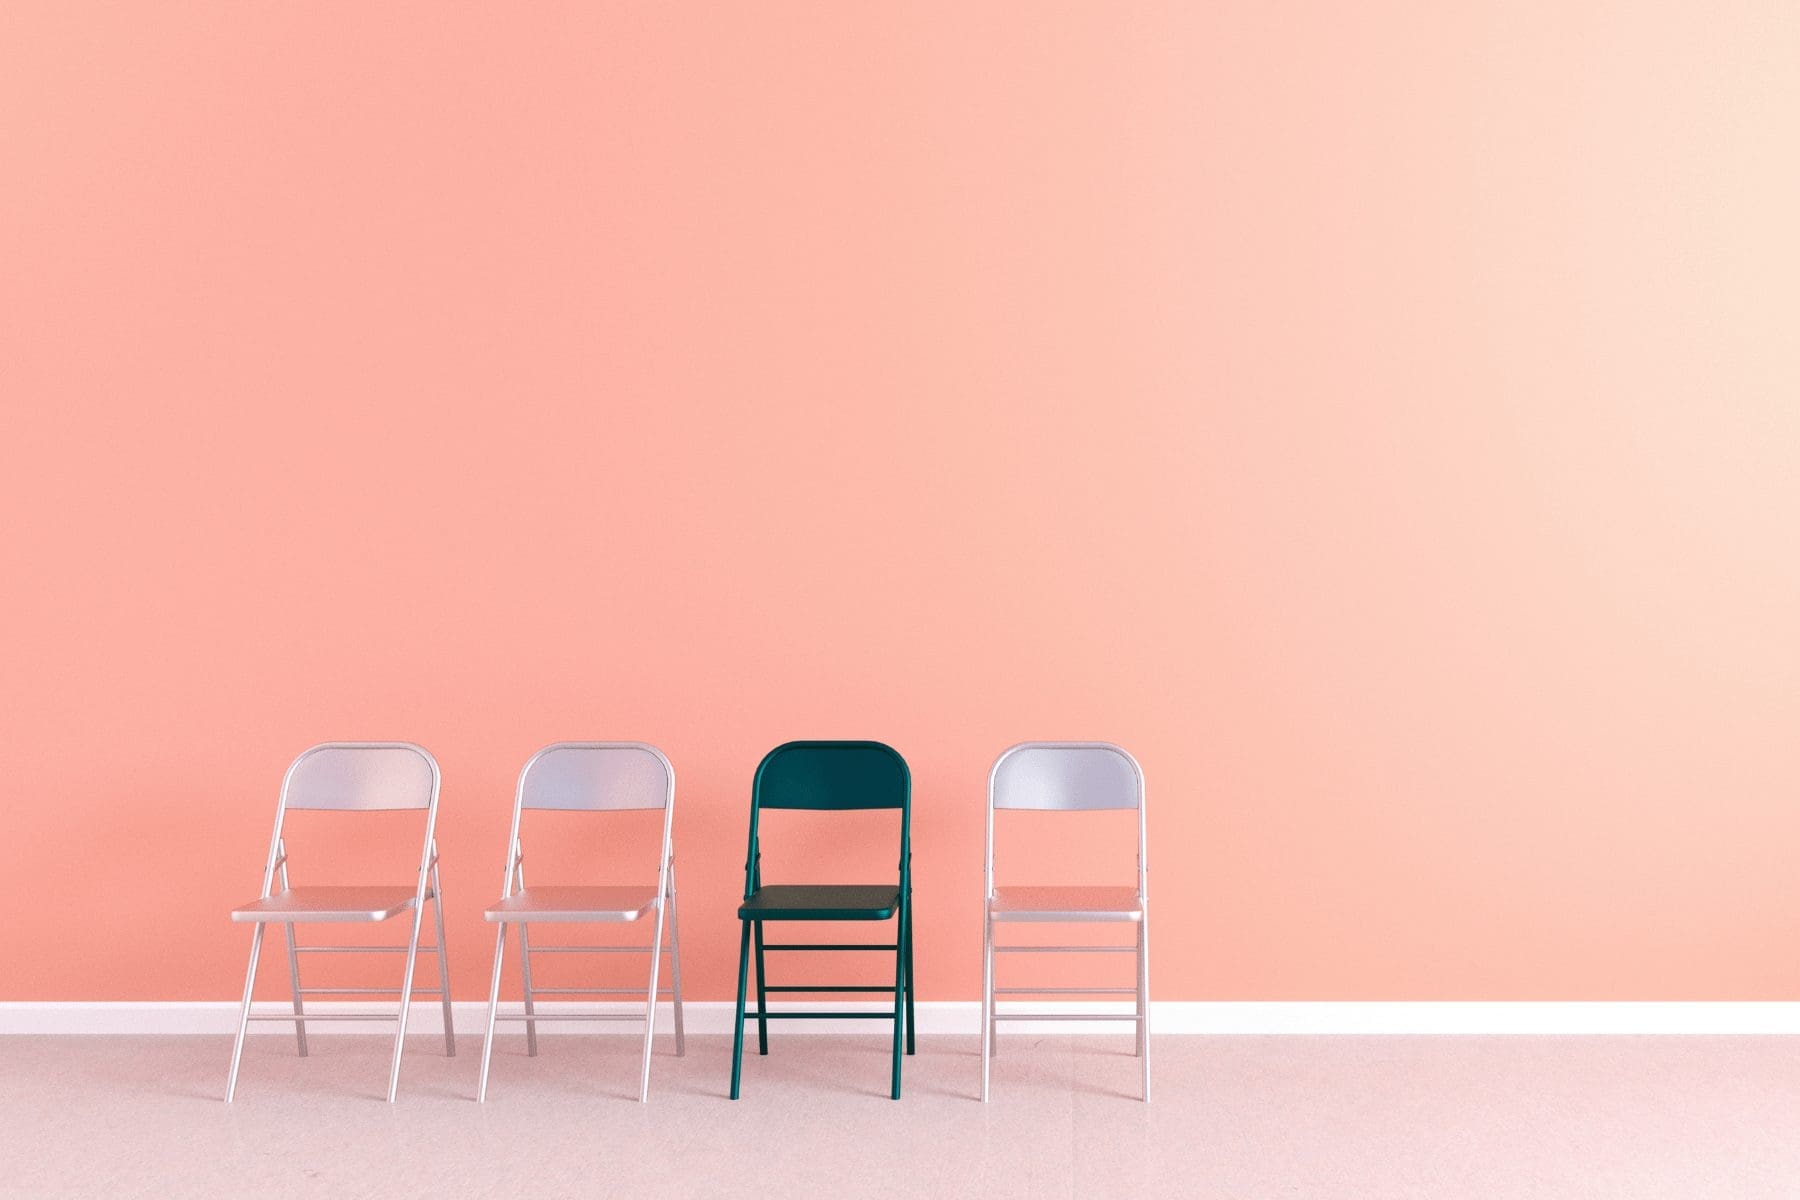 empty folding chairs illustrating employee attraction and retention